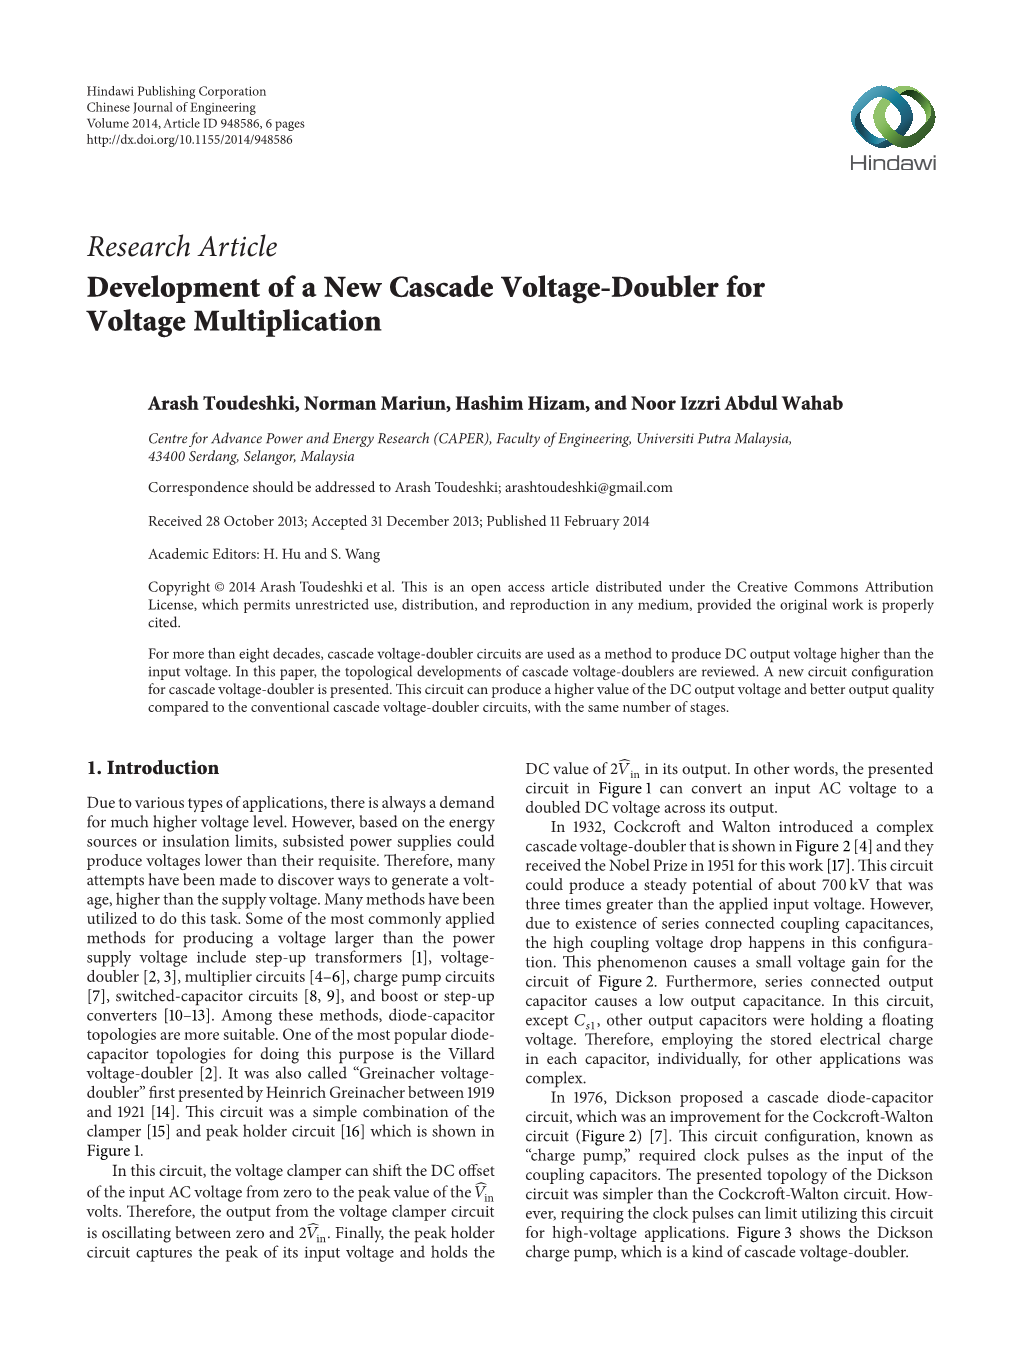 Development of a New Cascade Voltage-Doubler for Voltage Multiplication